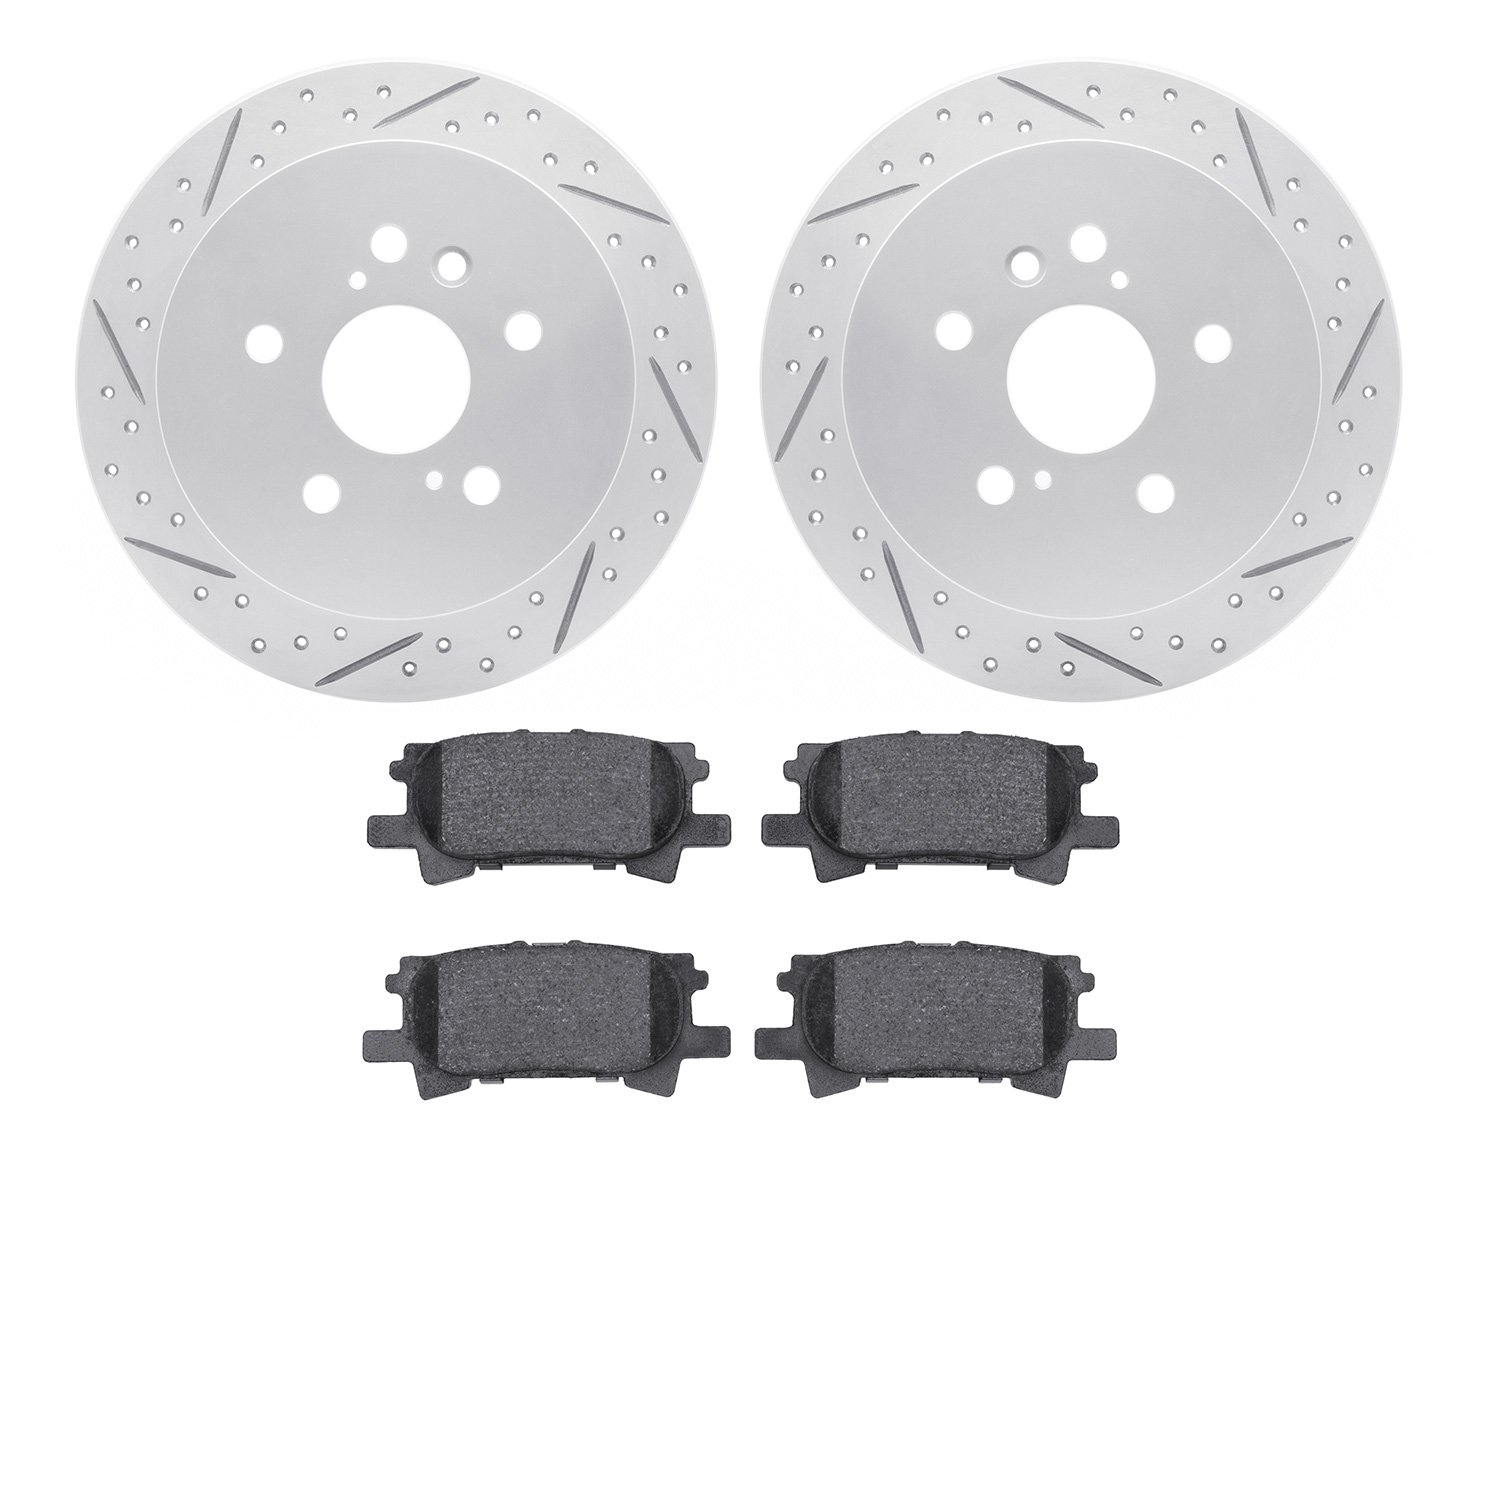 2502-76150 Geoperformance Drilled/Slotted Rotors w/5000 Advanced Brake Pads Kit, 2004-2009 Lexus/Toyota/Scion, Position: Rear